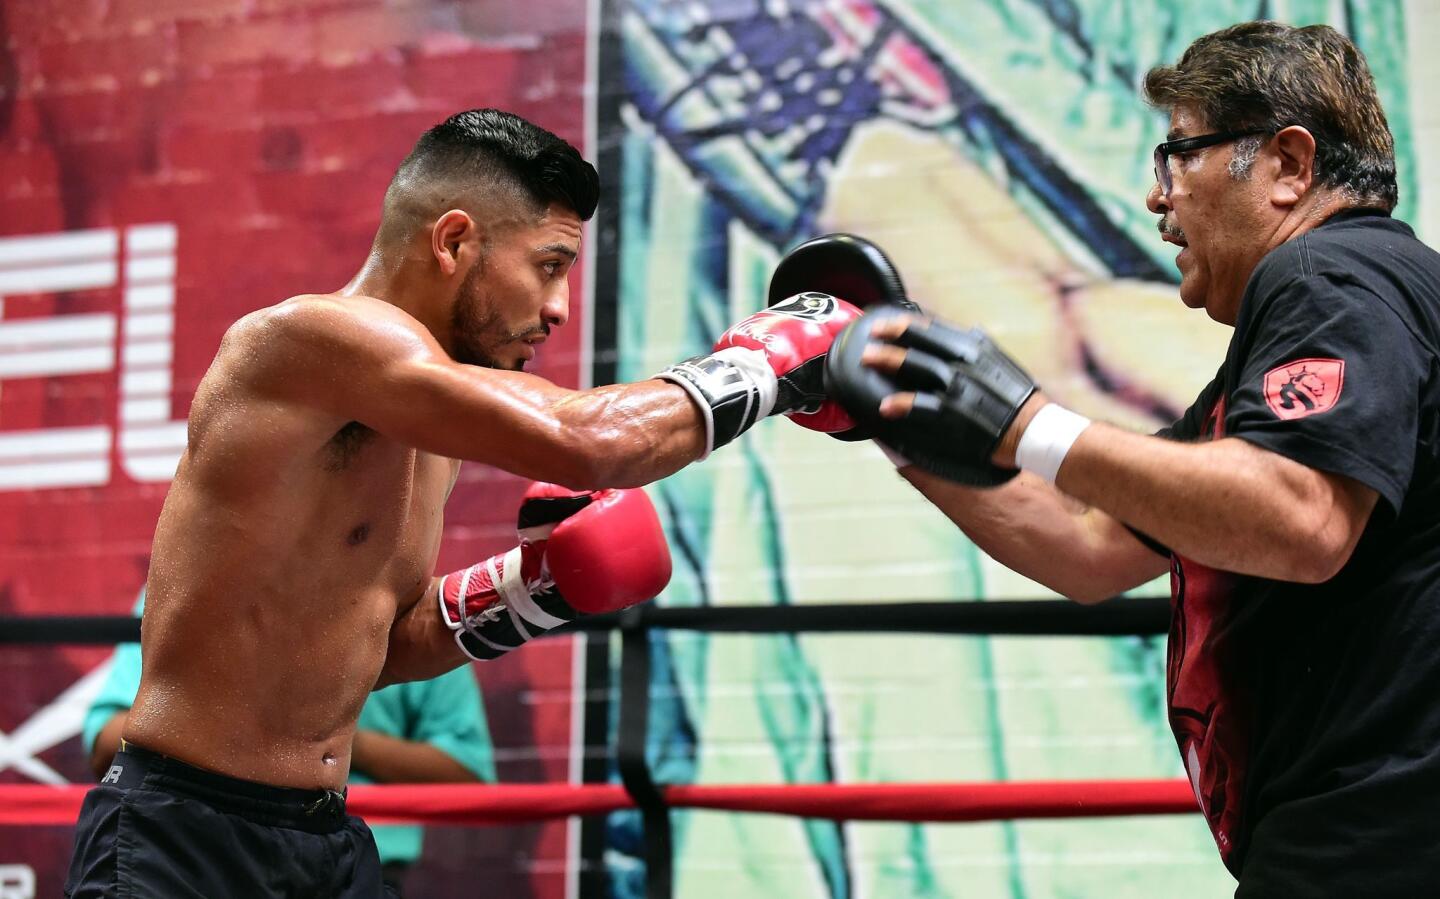 Former three division world champion boxer Abner Mares works out for the media on August 18, 2015 in Bell Gardens, California, ahead of his "Battle of Los Angeles" match against former two division world champion Leo Santa Cruz at Staples Center. The two Mexico-born, California- based boxers will square off August 29th at Staples Center I los Angeles. AFP PHOTO / FREDERIC J. BROWNFREDERIC J. BROWN/AFP/Getty Images ** OUTS - ELSENT, FPG - OUTS * NM, PH, VA if sourced by CT, LA or MoD **